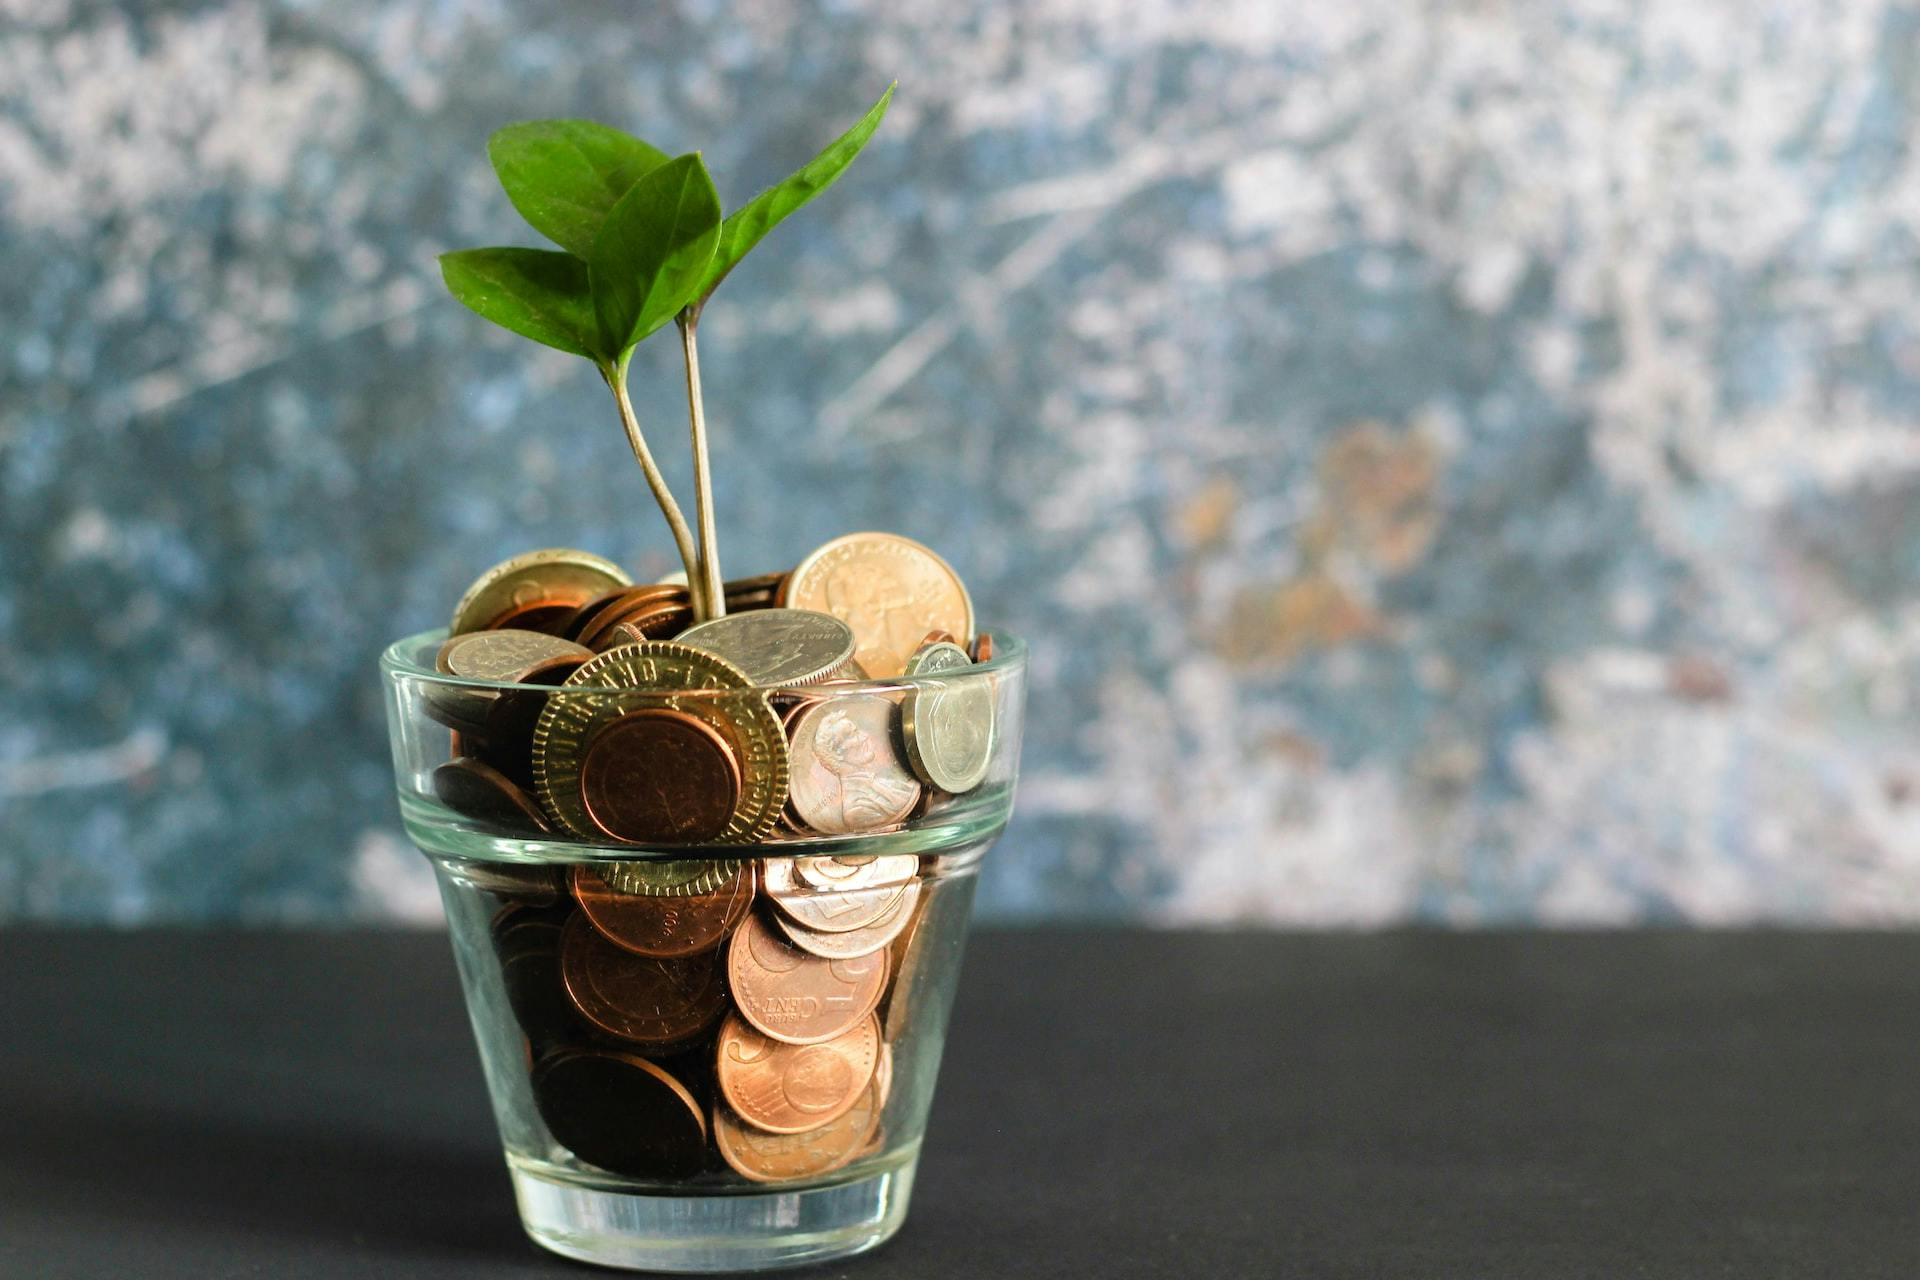 Cover image of a pot of money with a plant growing in it